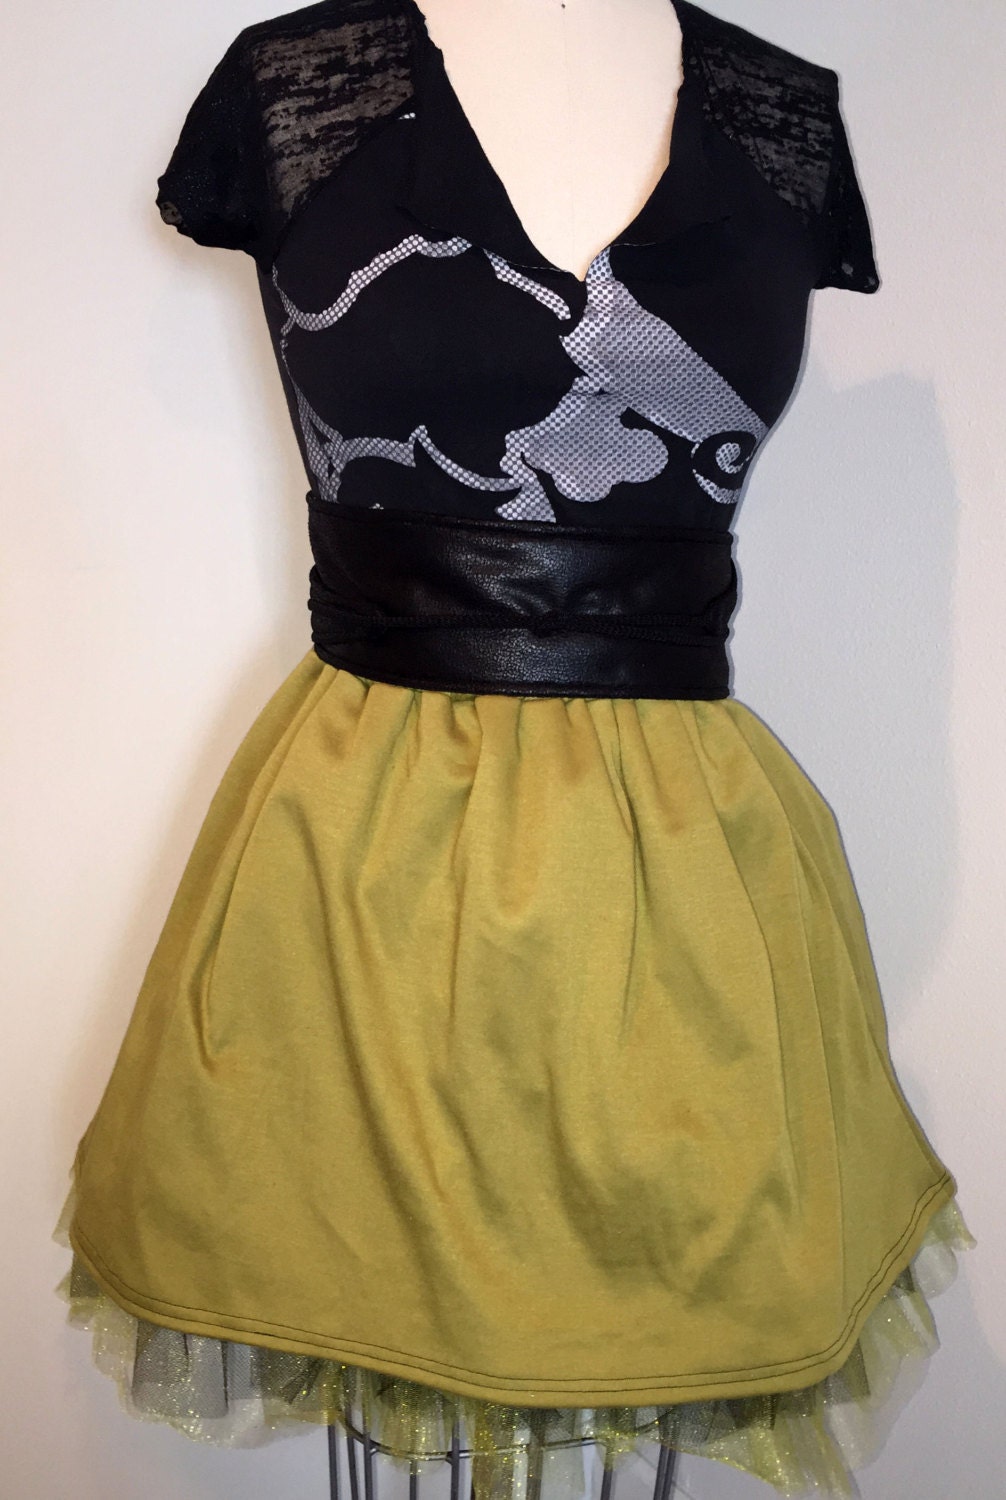 Full Skirt with Contrasting Crinoline Poly knit and tulle | Etsy